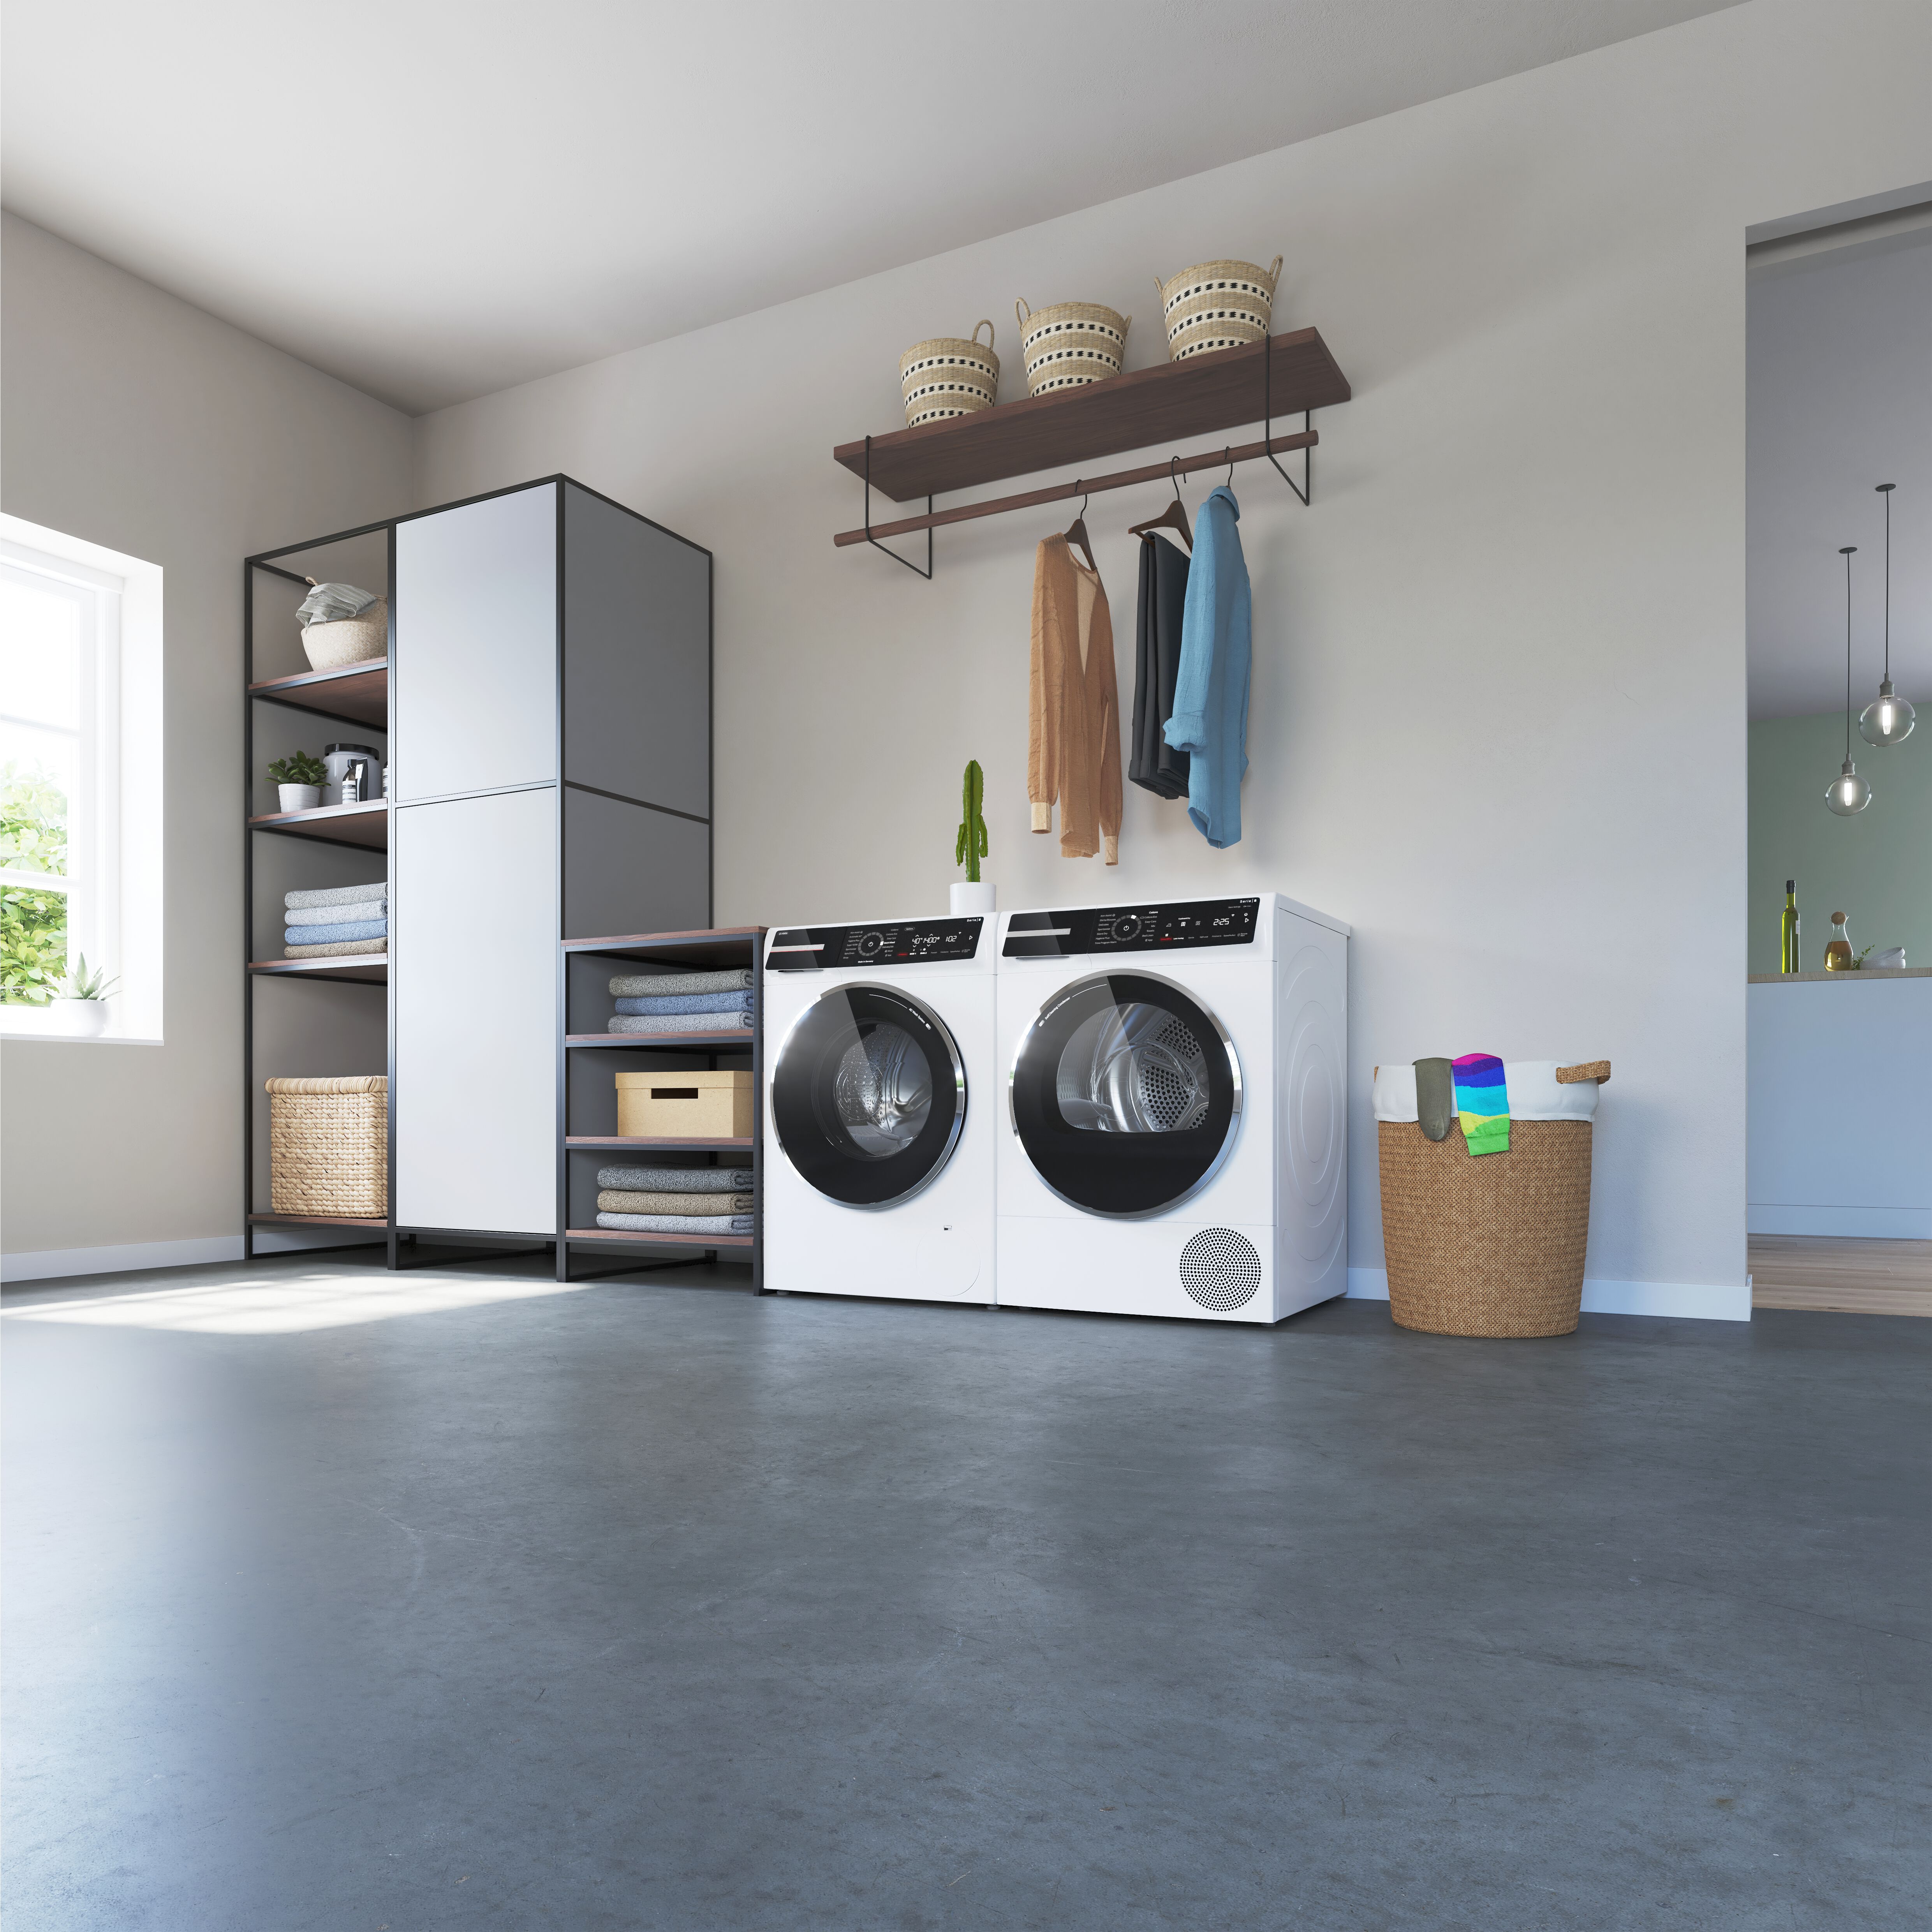 Consistently economical and quiet drying with the Bosch Series 8 heat pump dryer